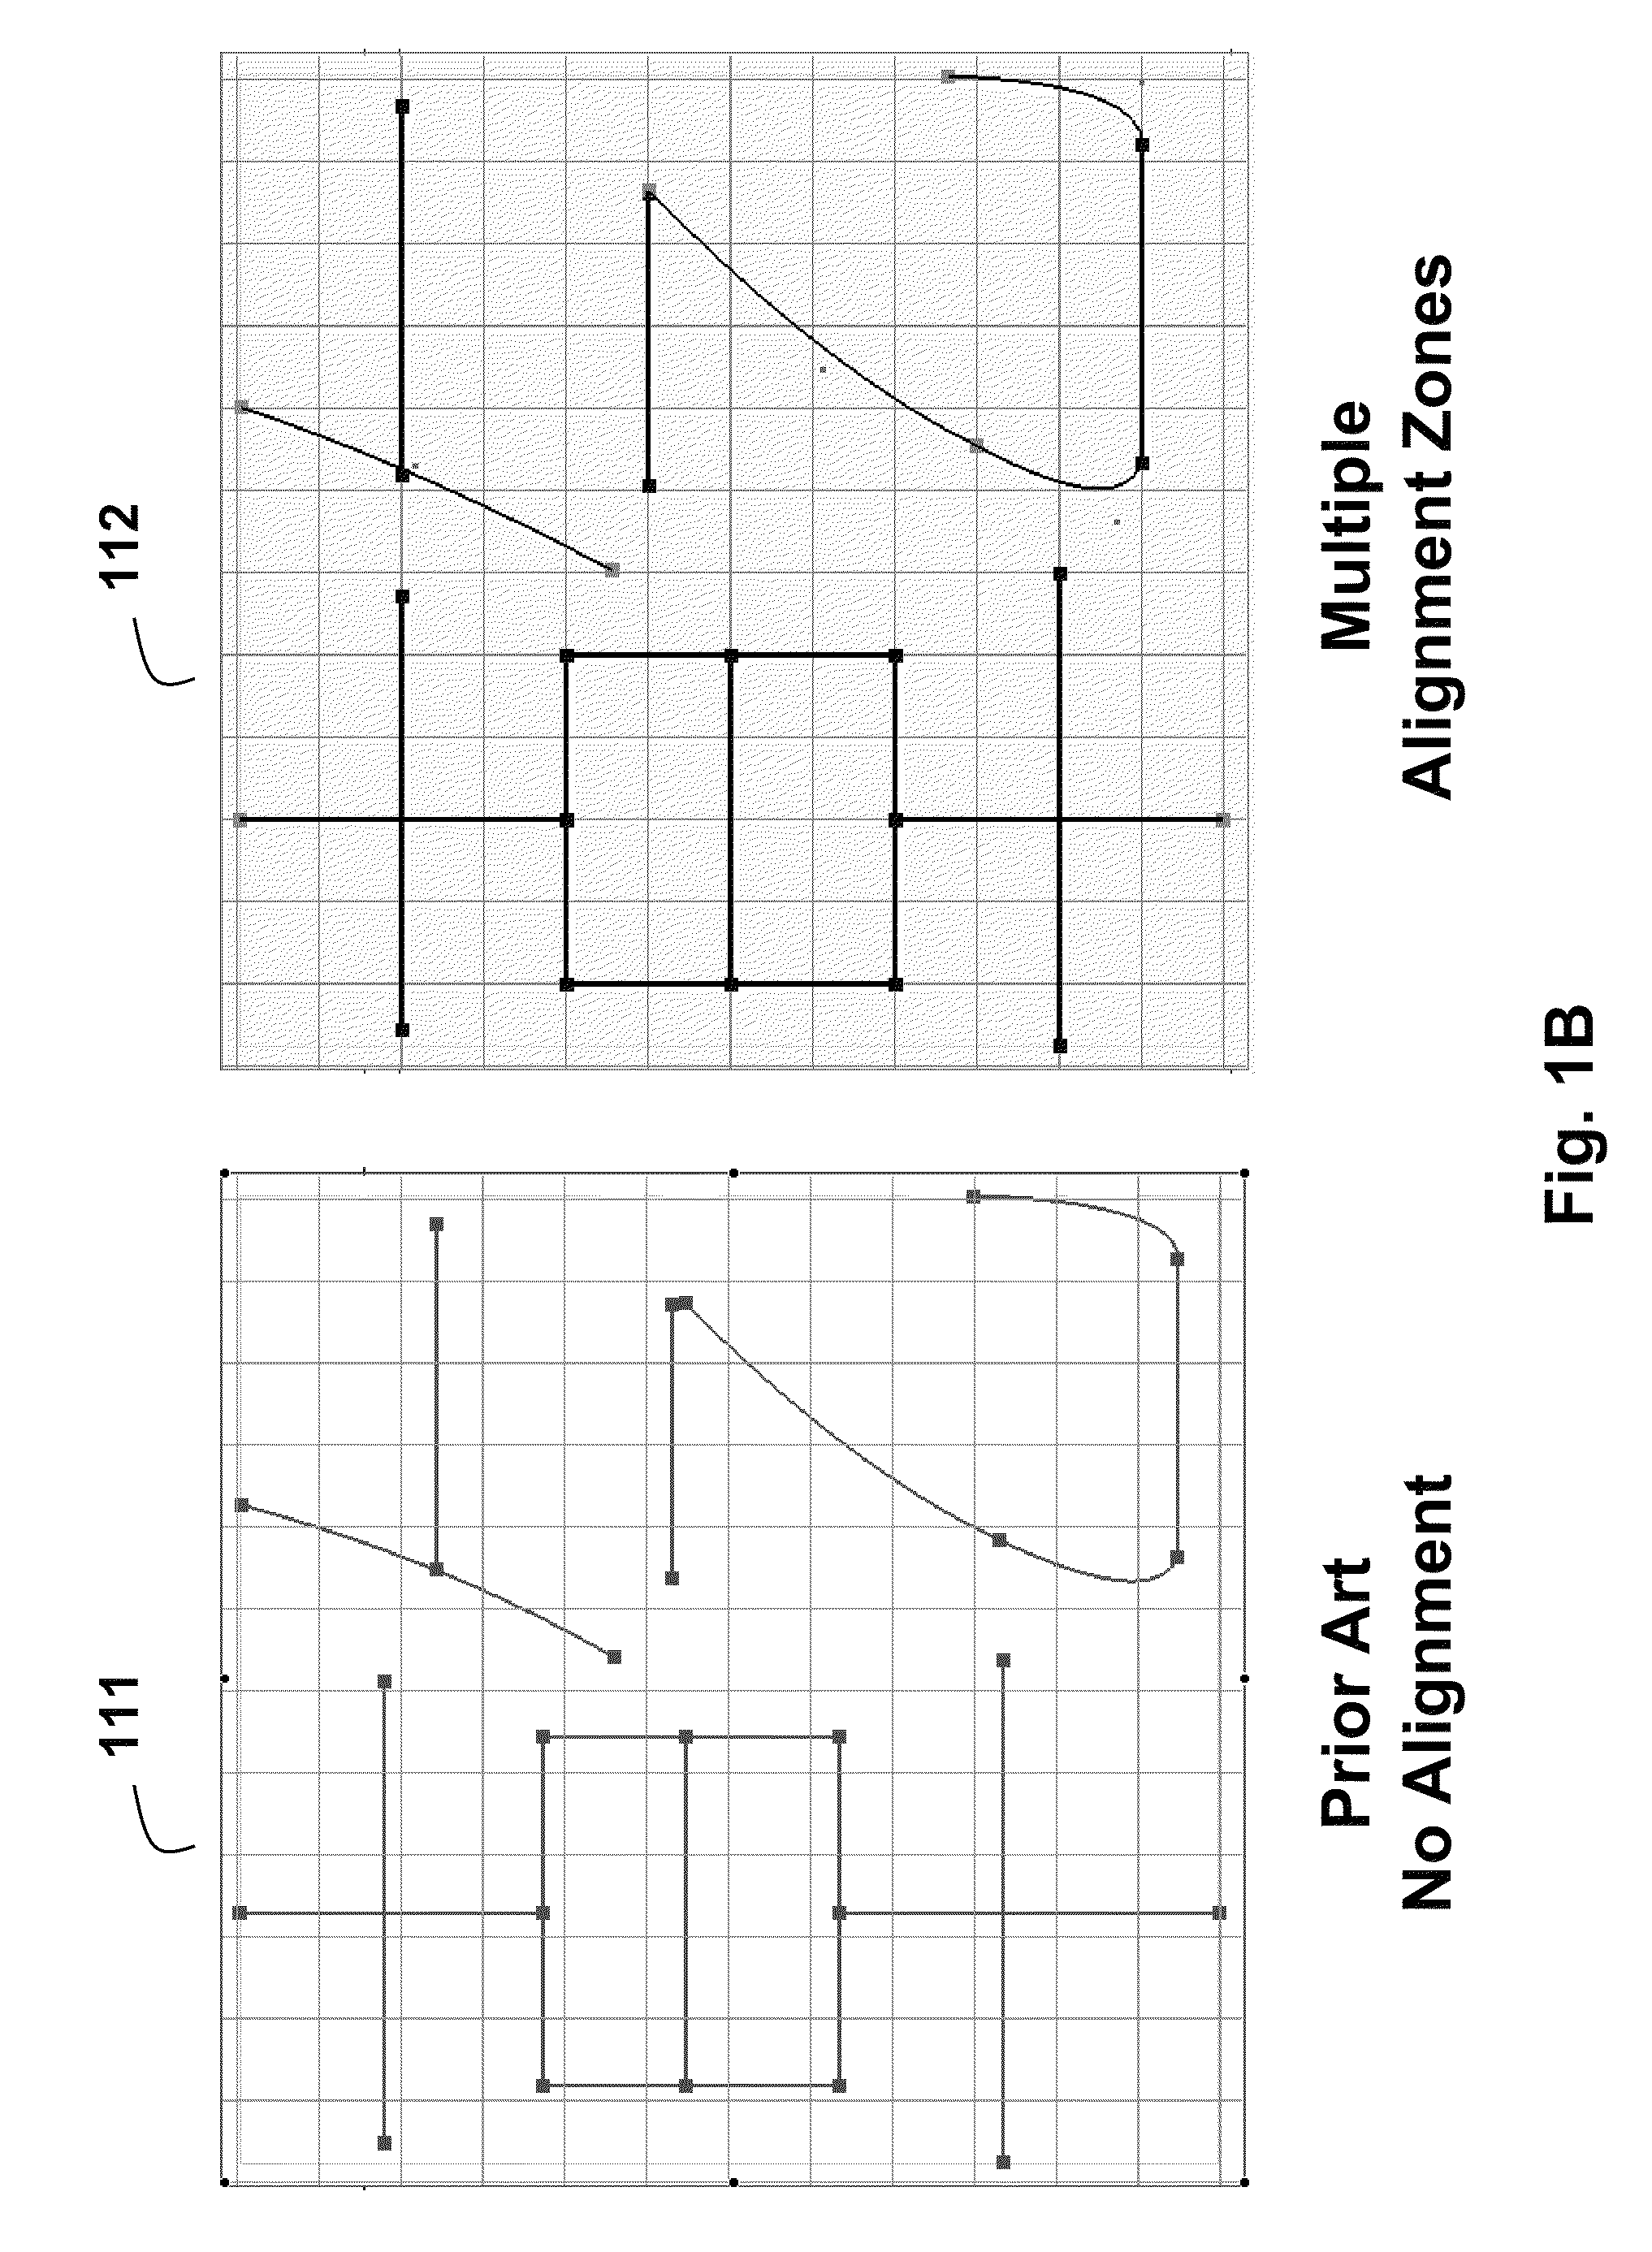 Method for improving uniform width character strokes using multiple alignment zones